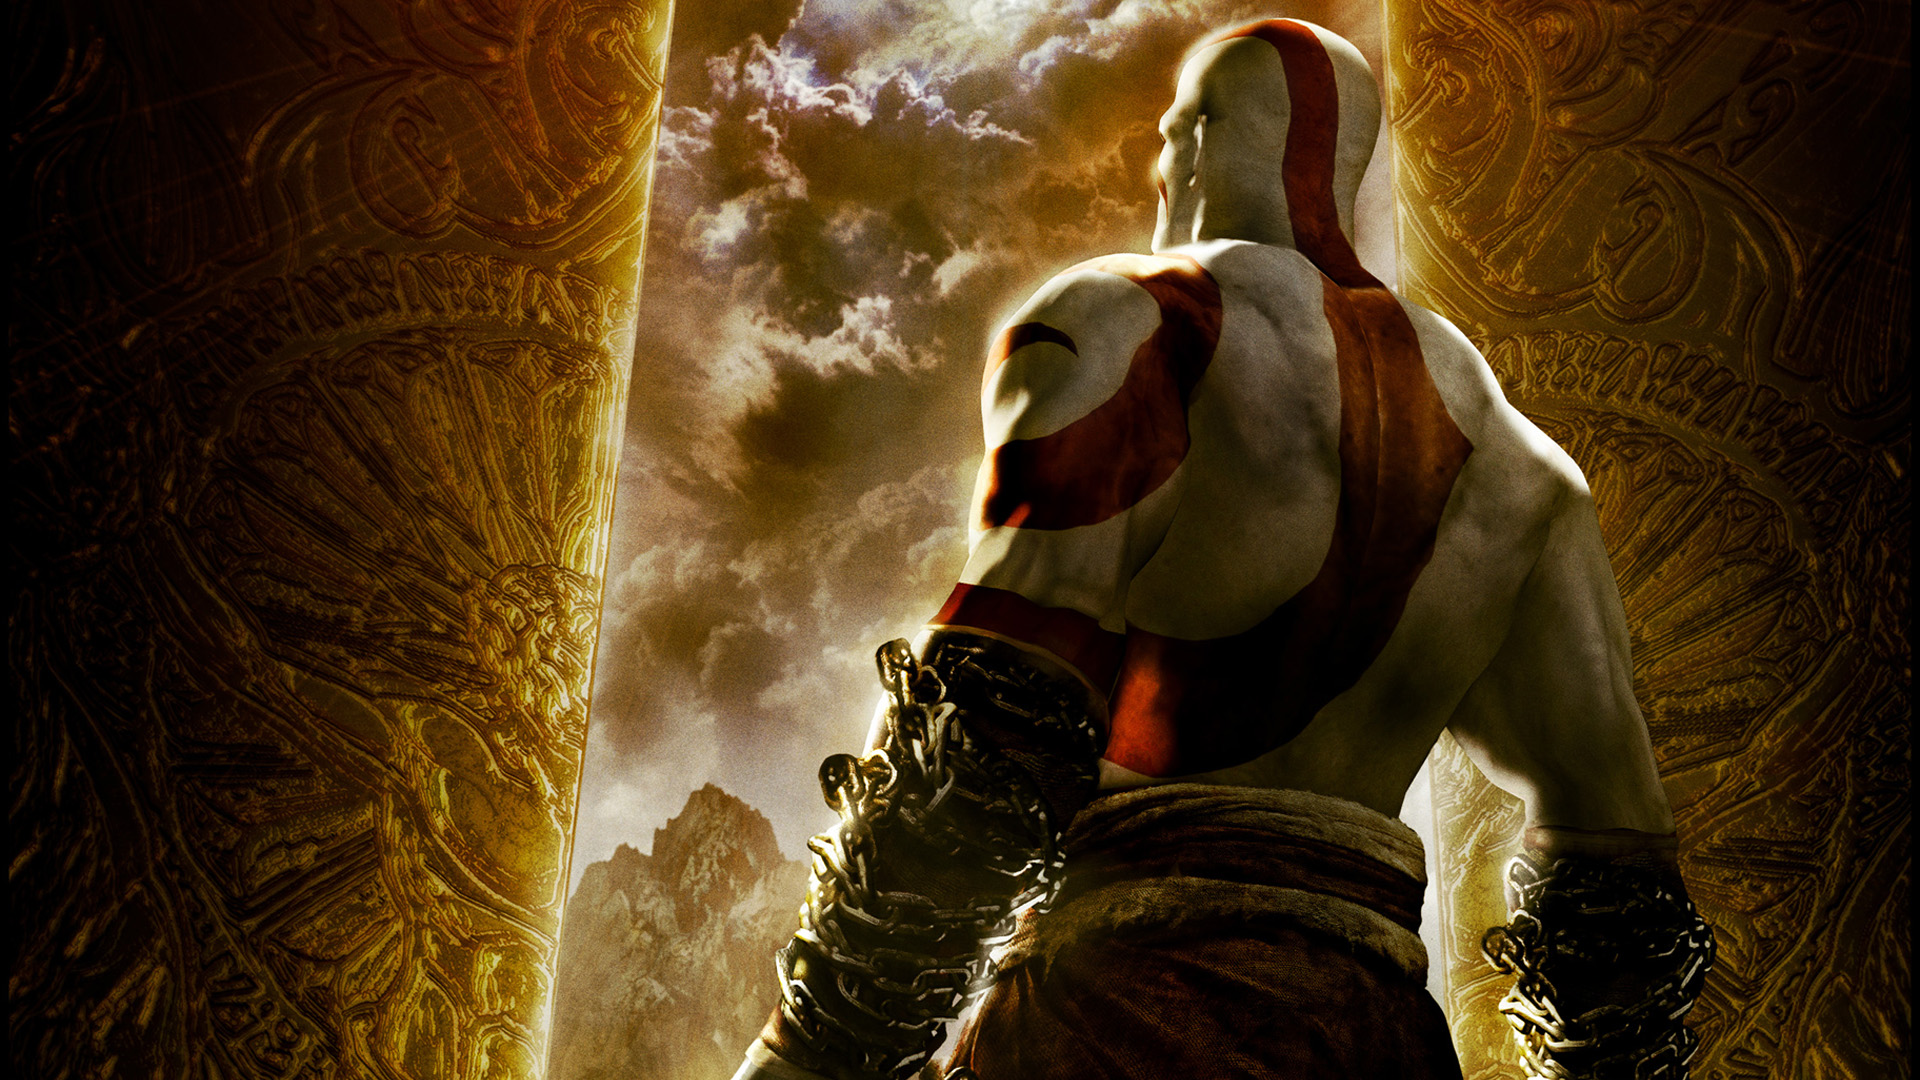 The Ultimate God of War Wallpaper 1920x1080